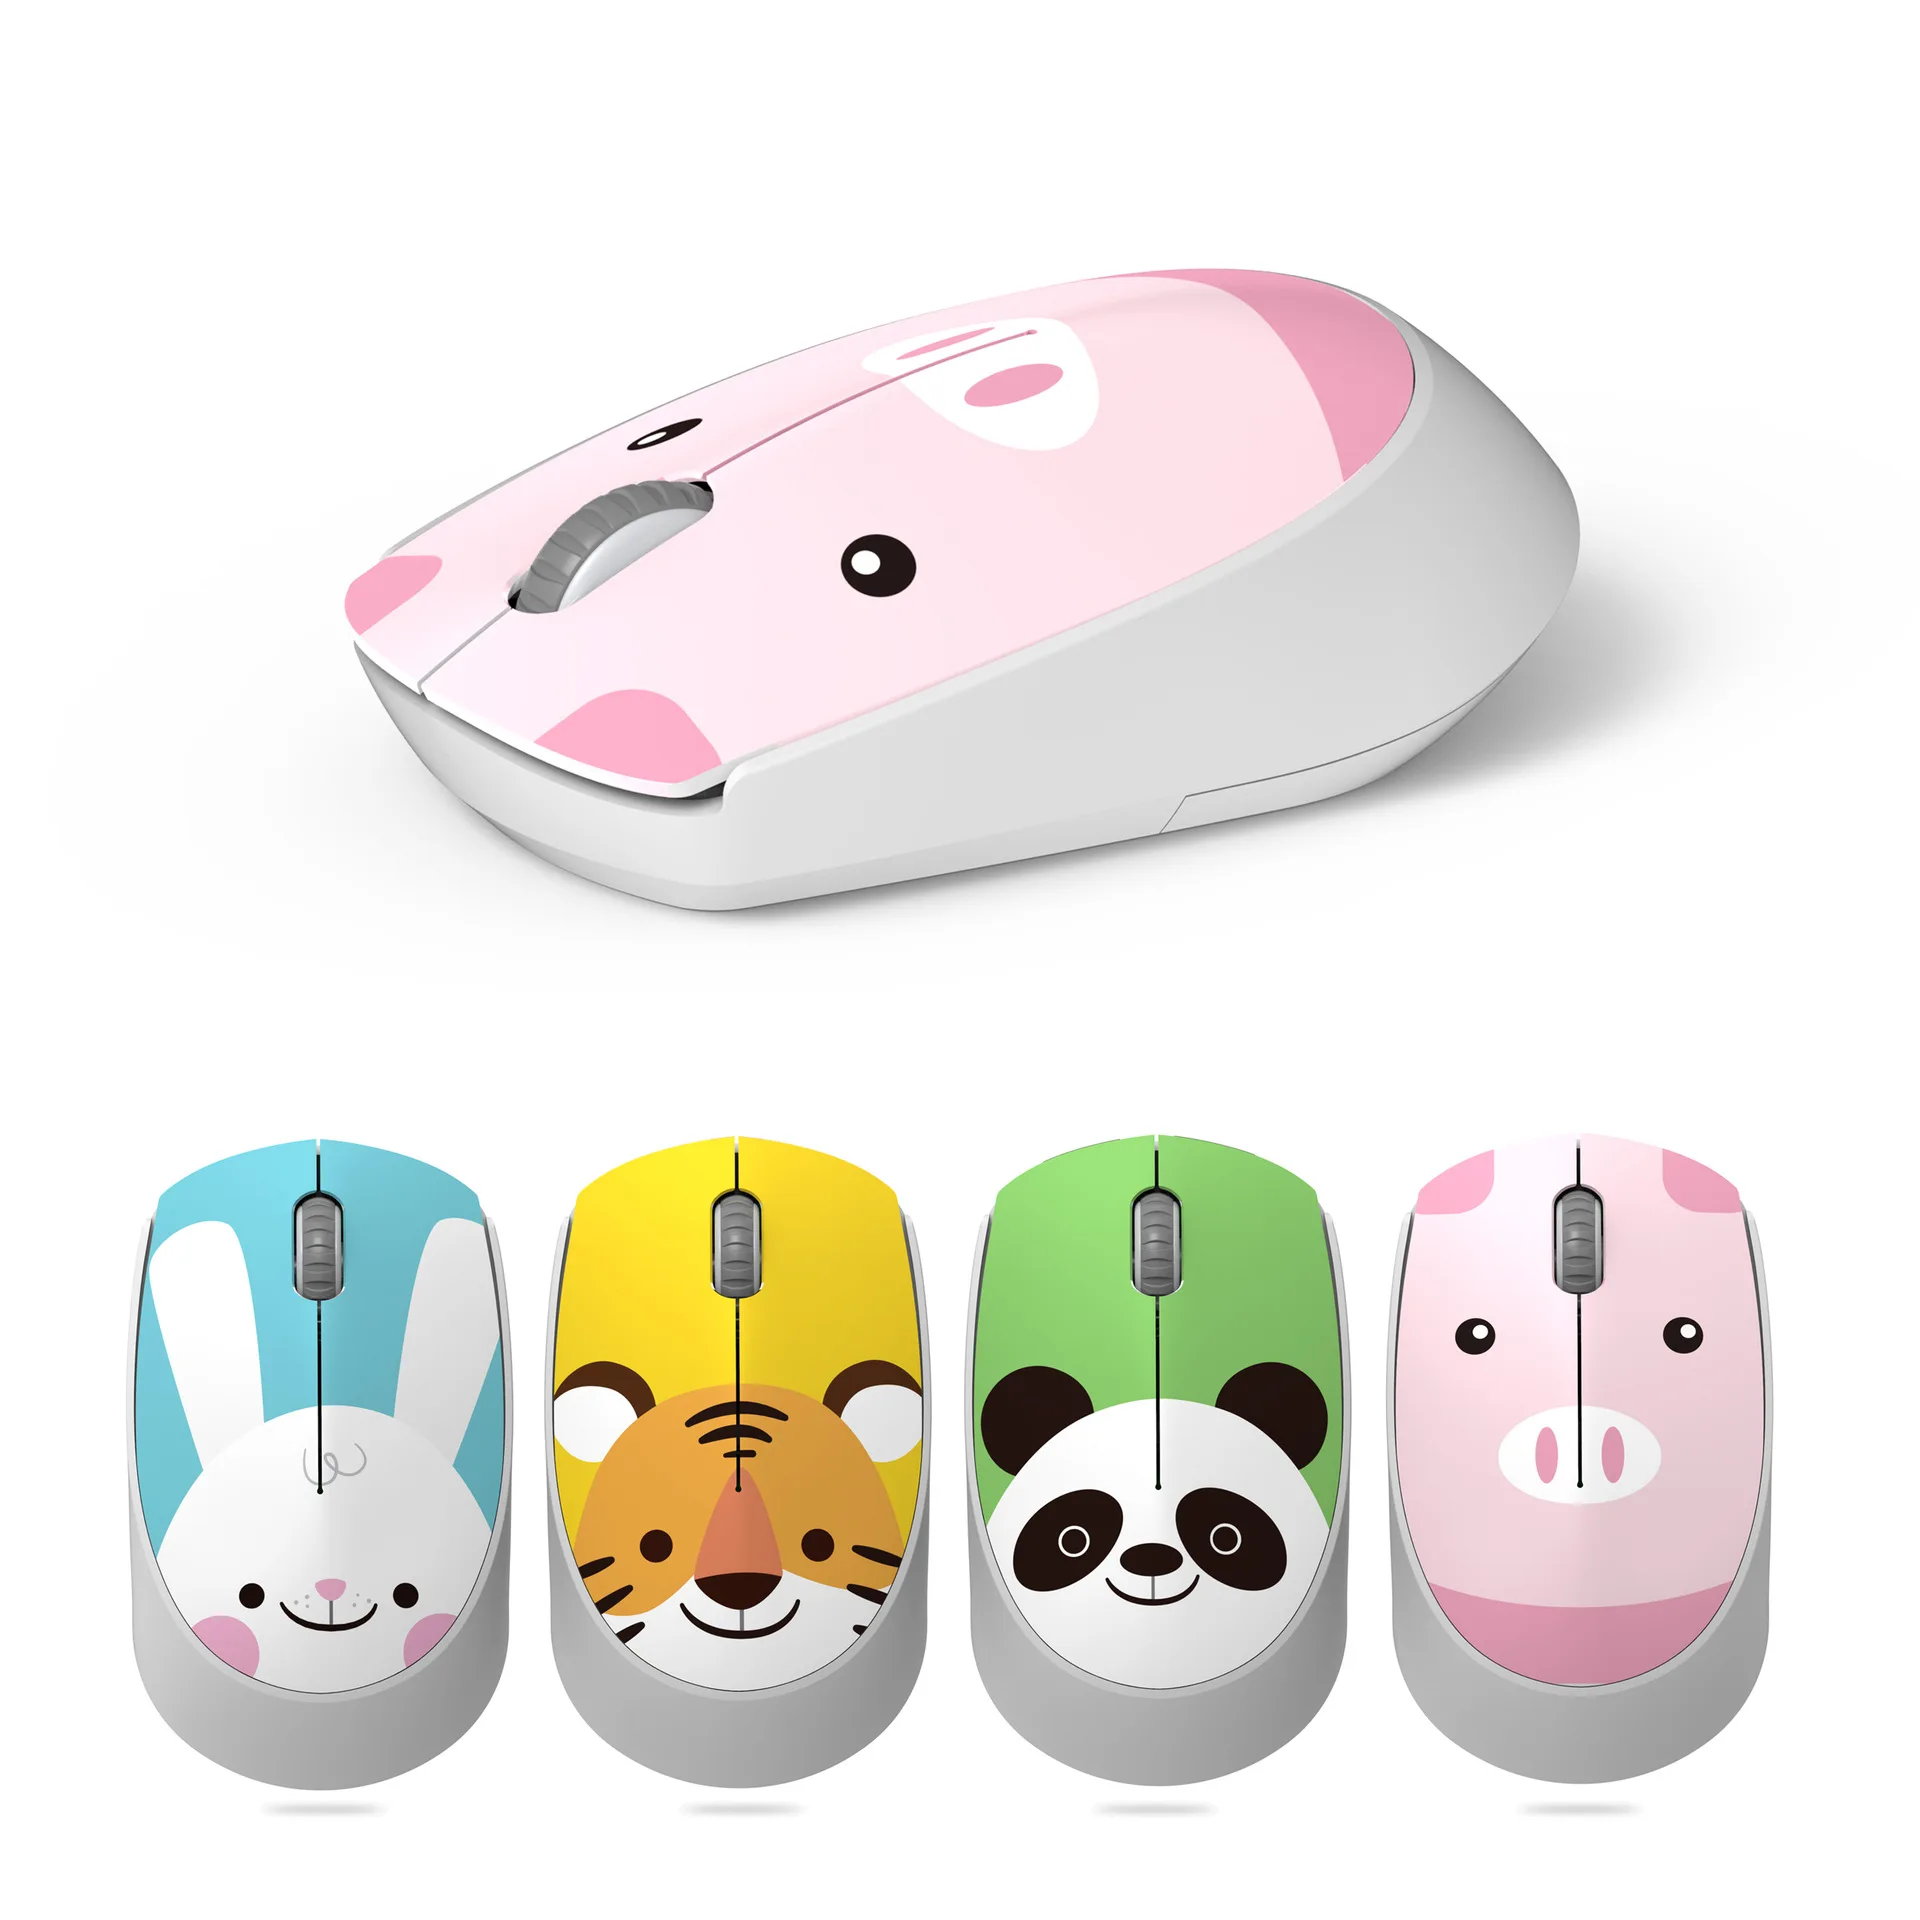 RU 2.4G Optical Lovely Wireless Mouse Cute Silent Mice Wireless Travel Mouse 1600 DPI Compatible for Laptop Notebook PC Computer